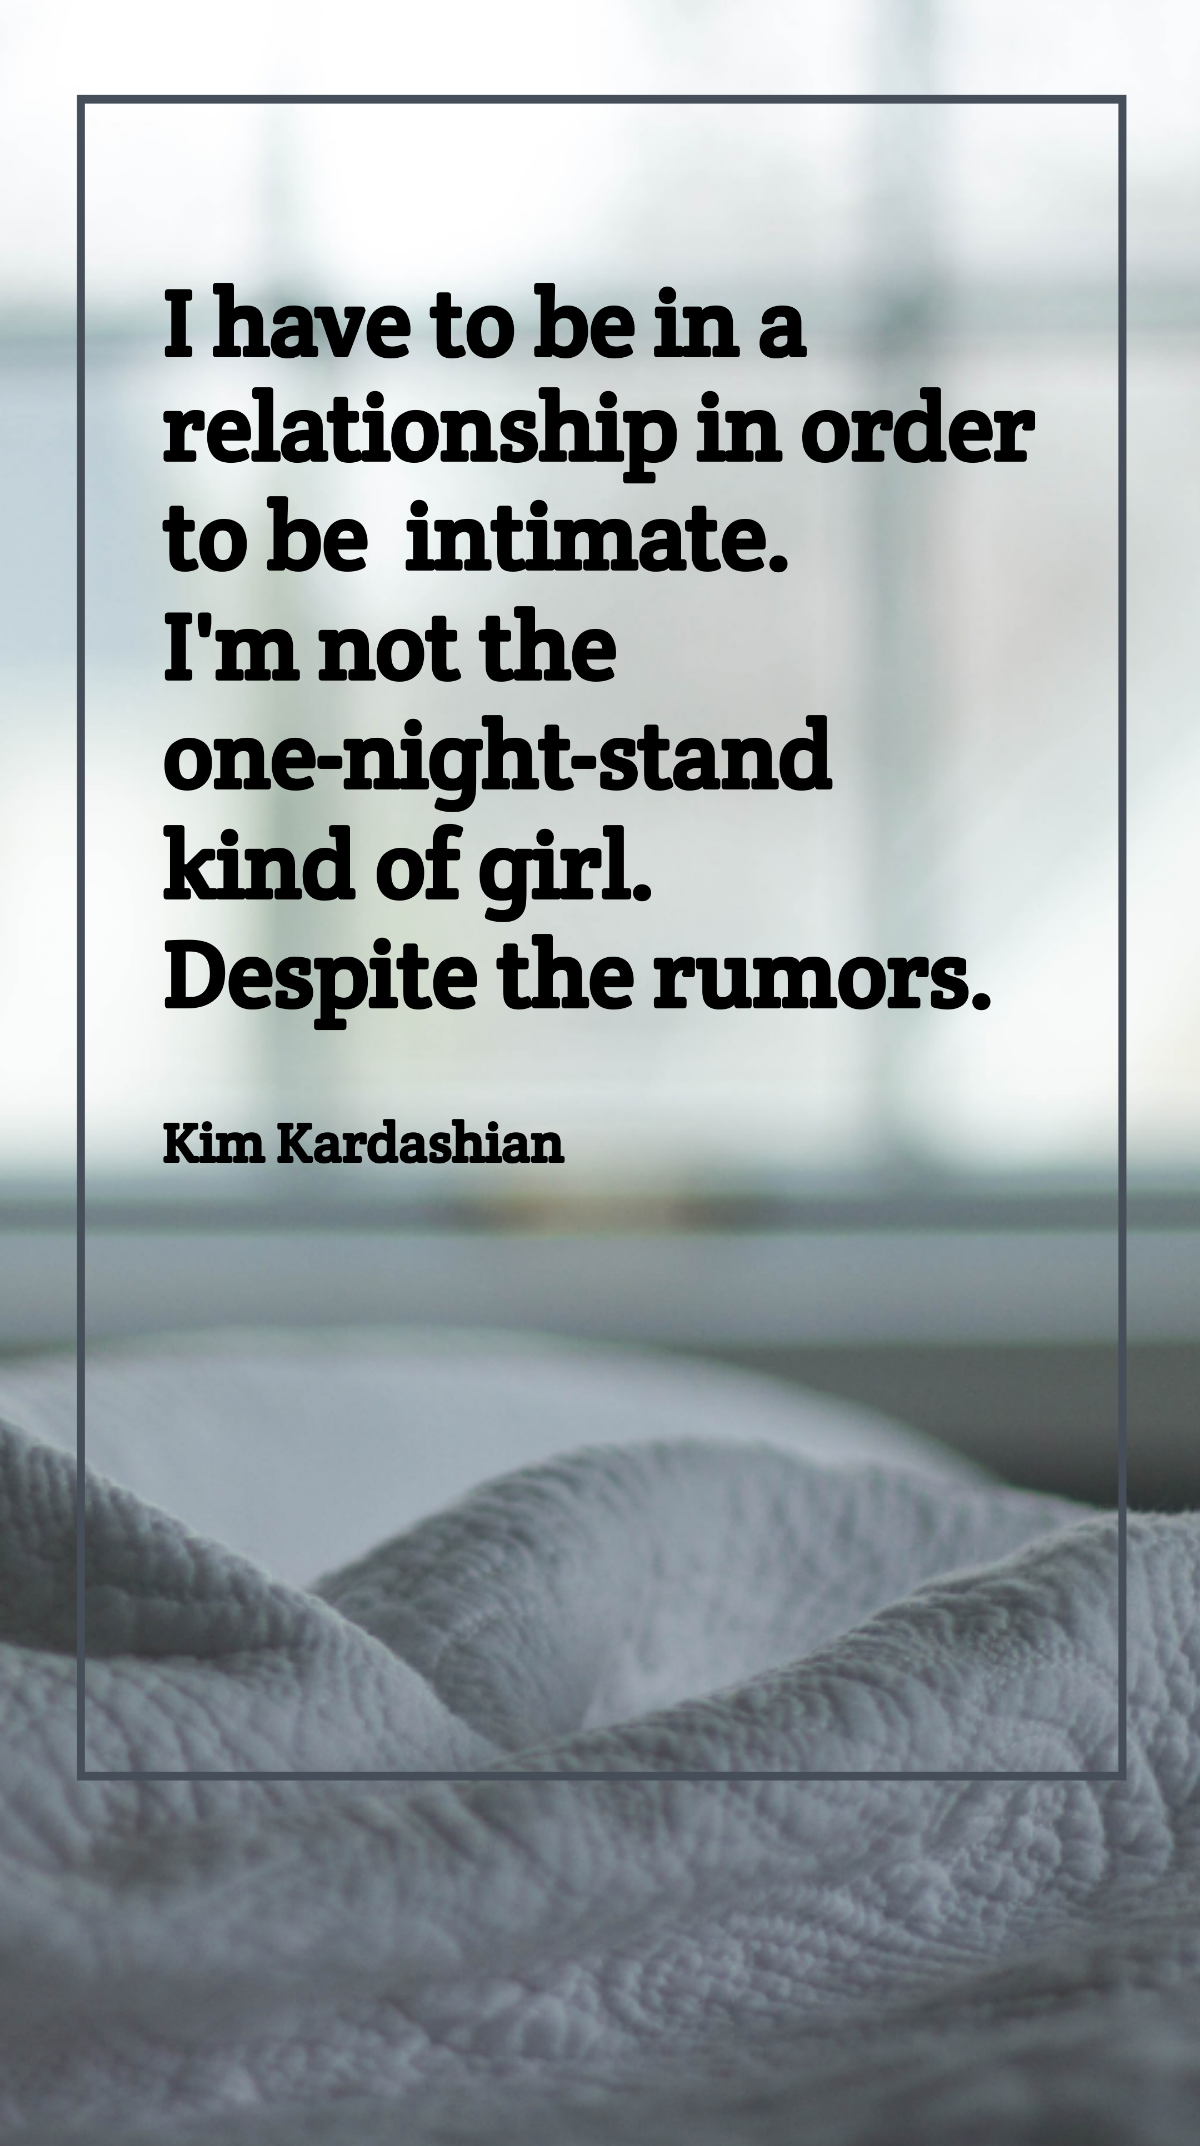 Kim Kardashian - I have to be in a relationship in order to be intimate. I'm not the one-night-stand kind of girl. Despite the rumors. Template